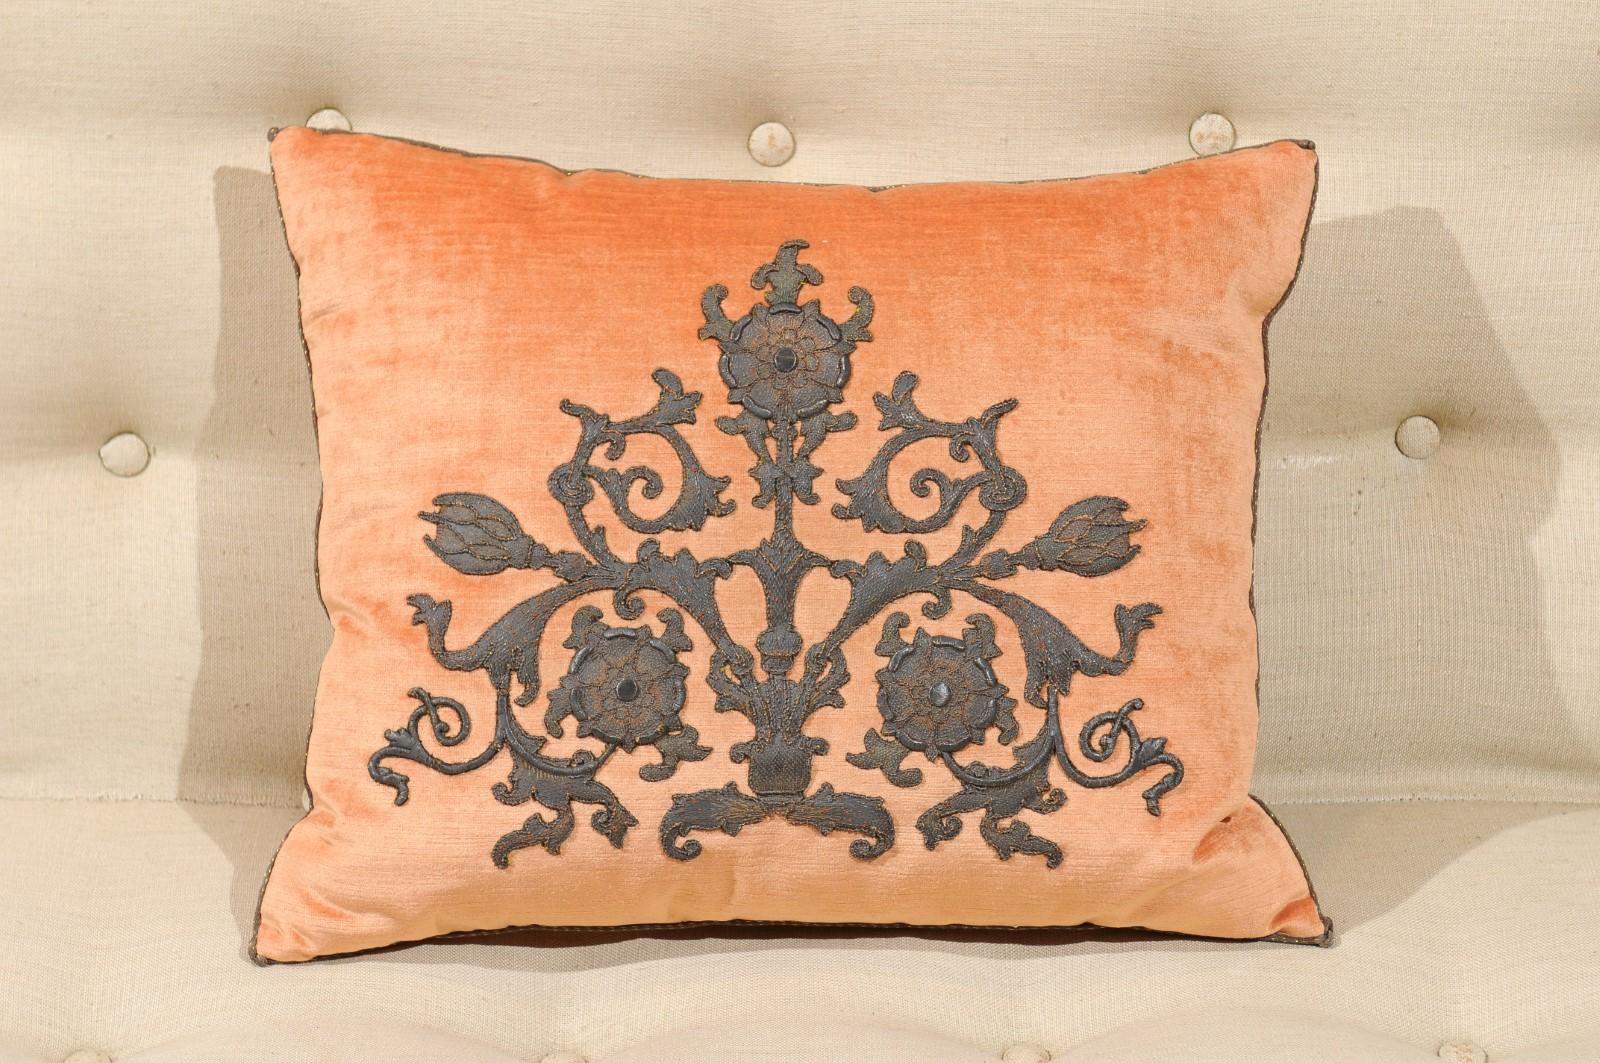 Melon Velvet Pillow with Tarnished Silver Metallic Scrollwork Applied Embroidery 2